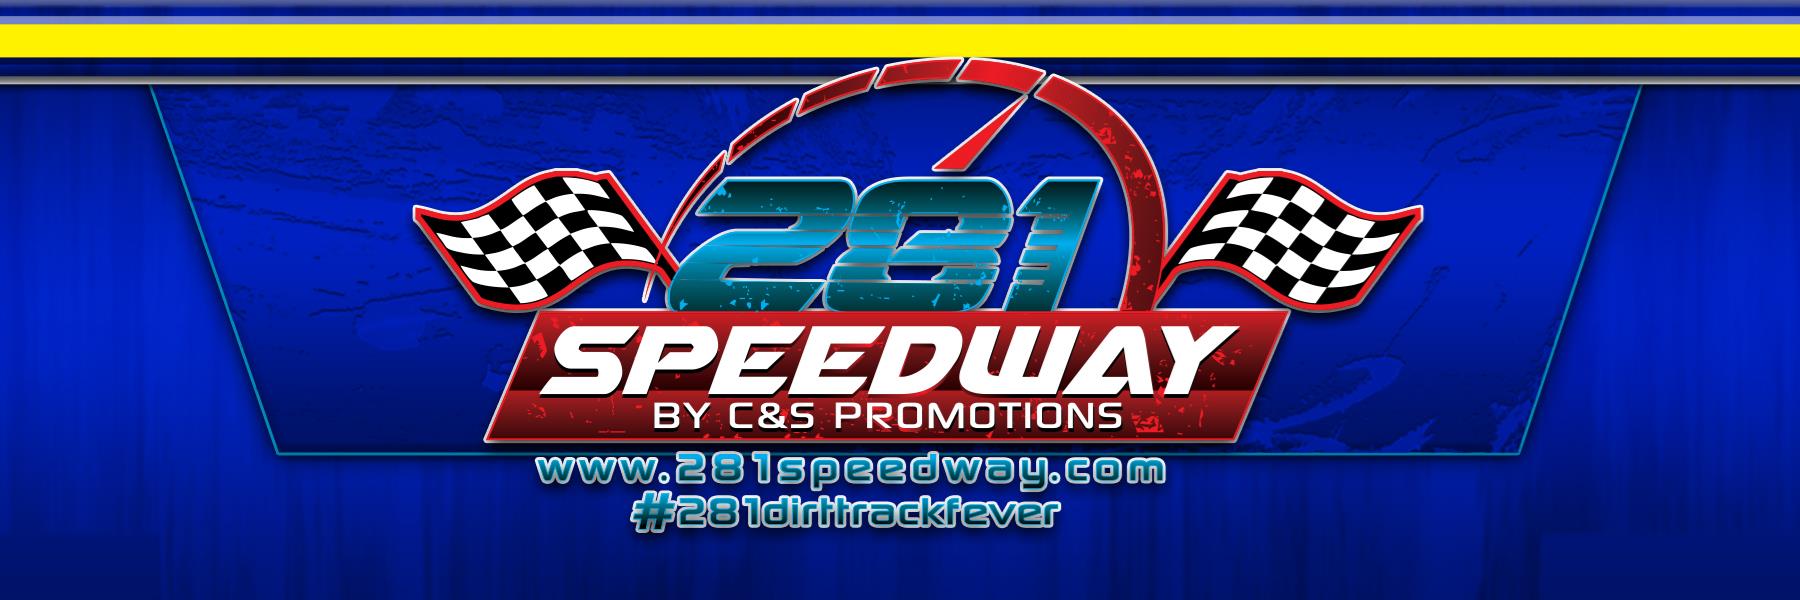 9/28/2019 - 281 Speedway by C&S Promotions